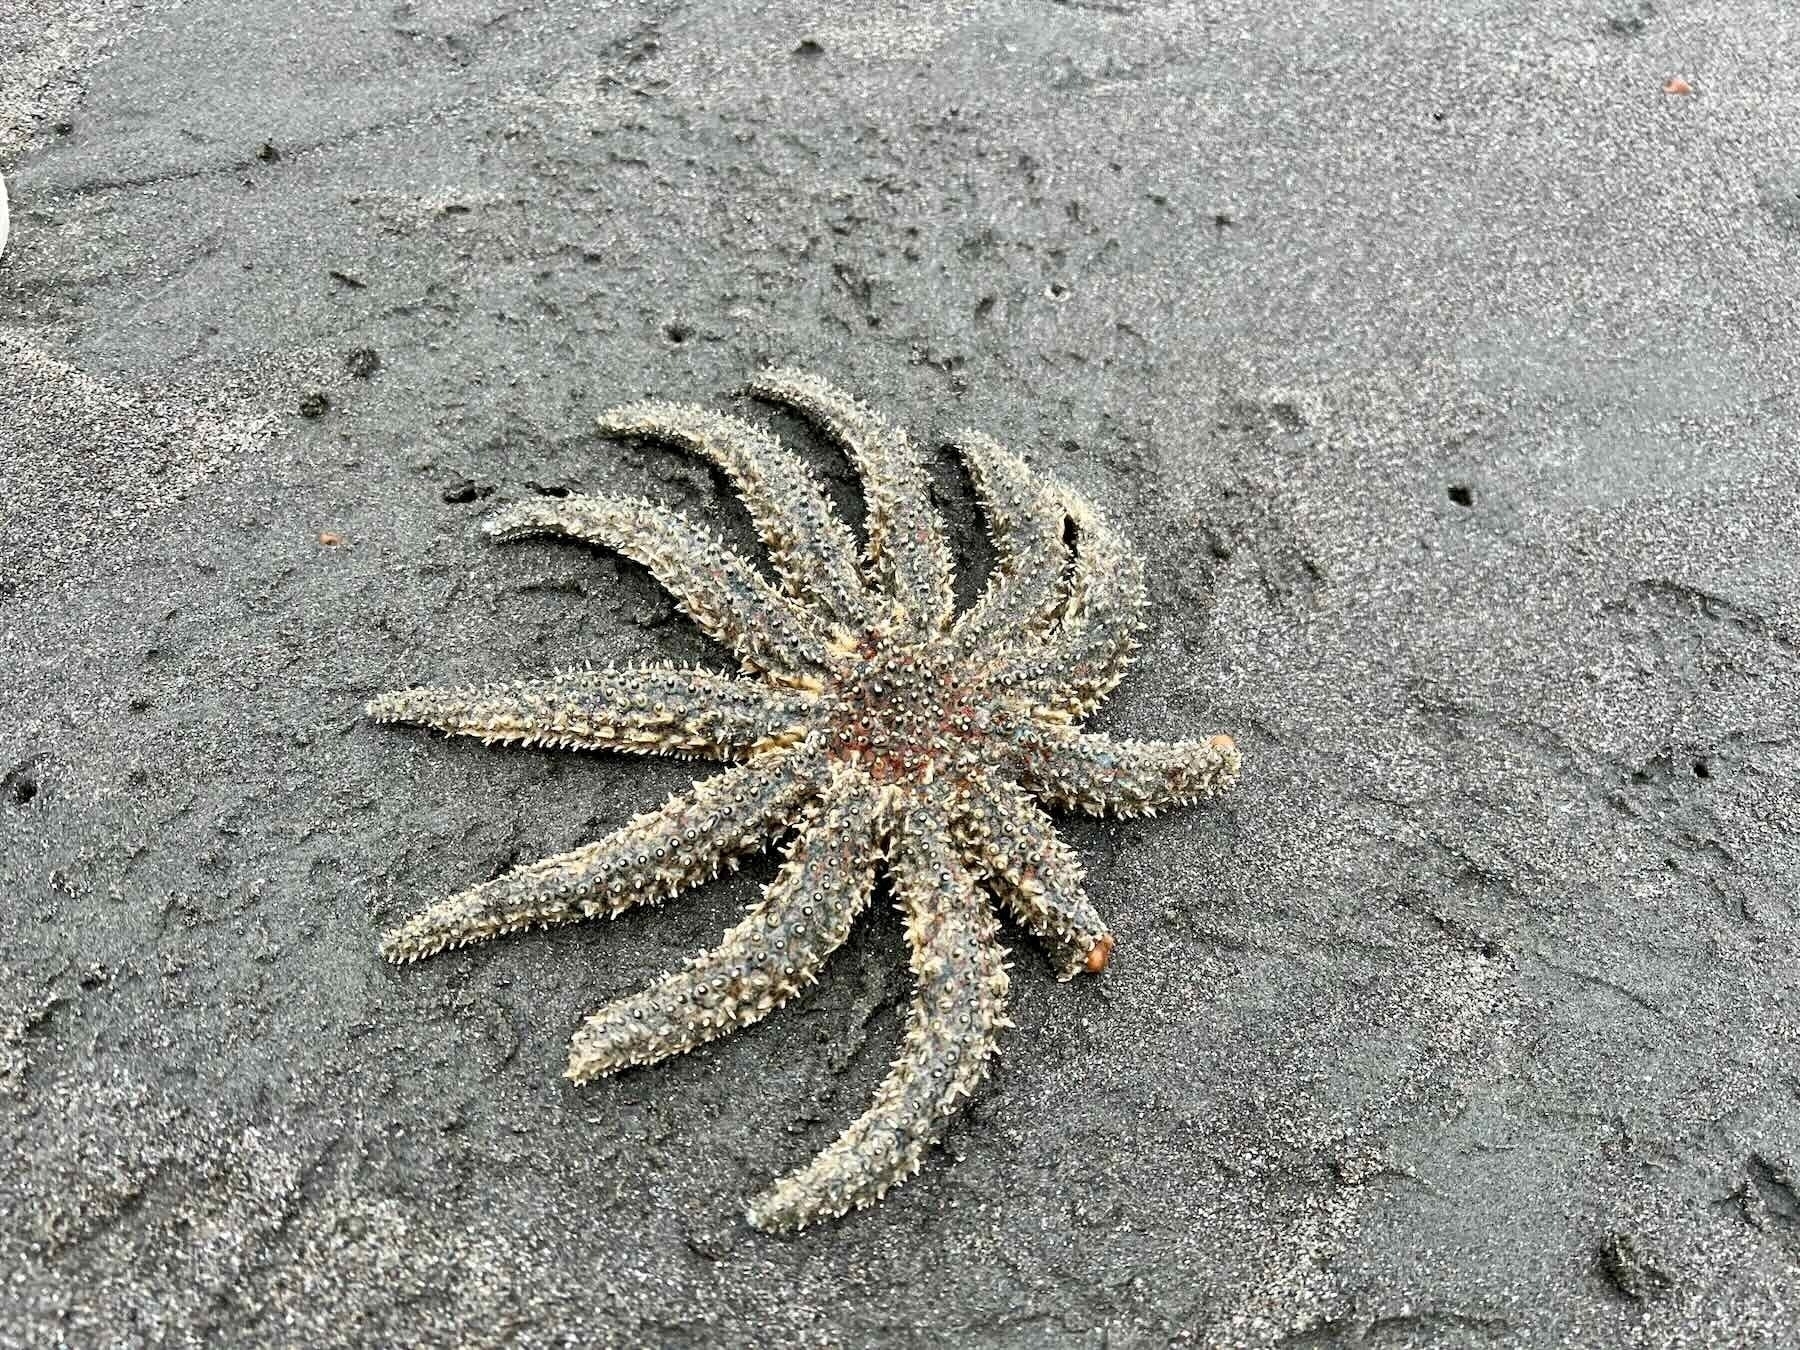 Eleven-Armed Sea Star, with two shortened arms, on sand. 